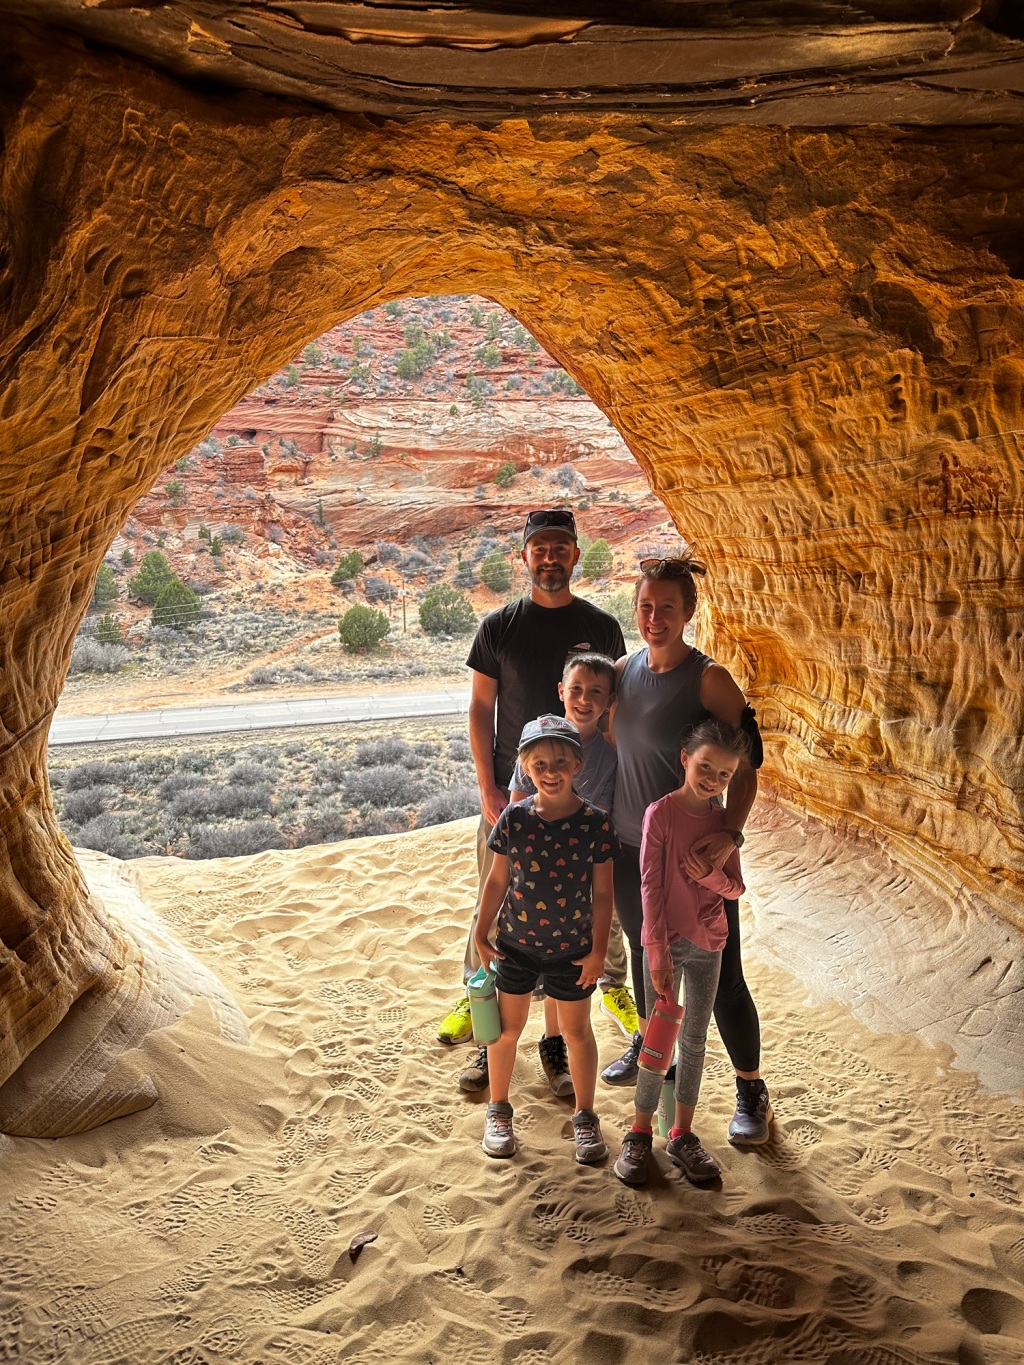 Sand Caves, Dragon Bellies and Dino prints